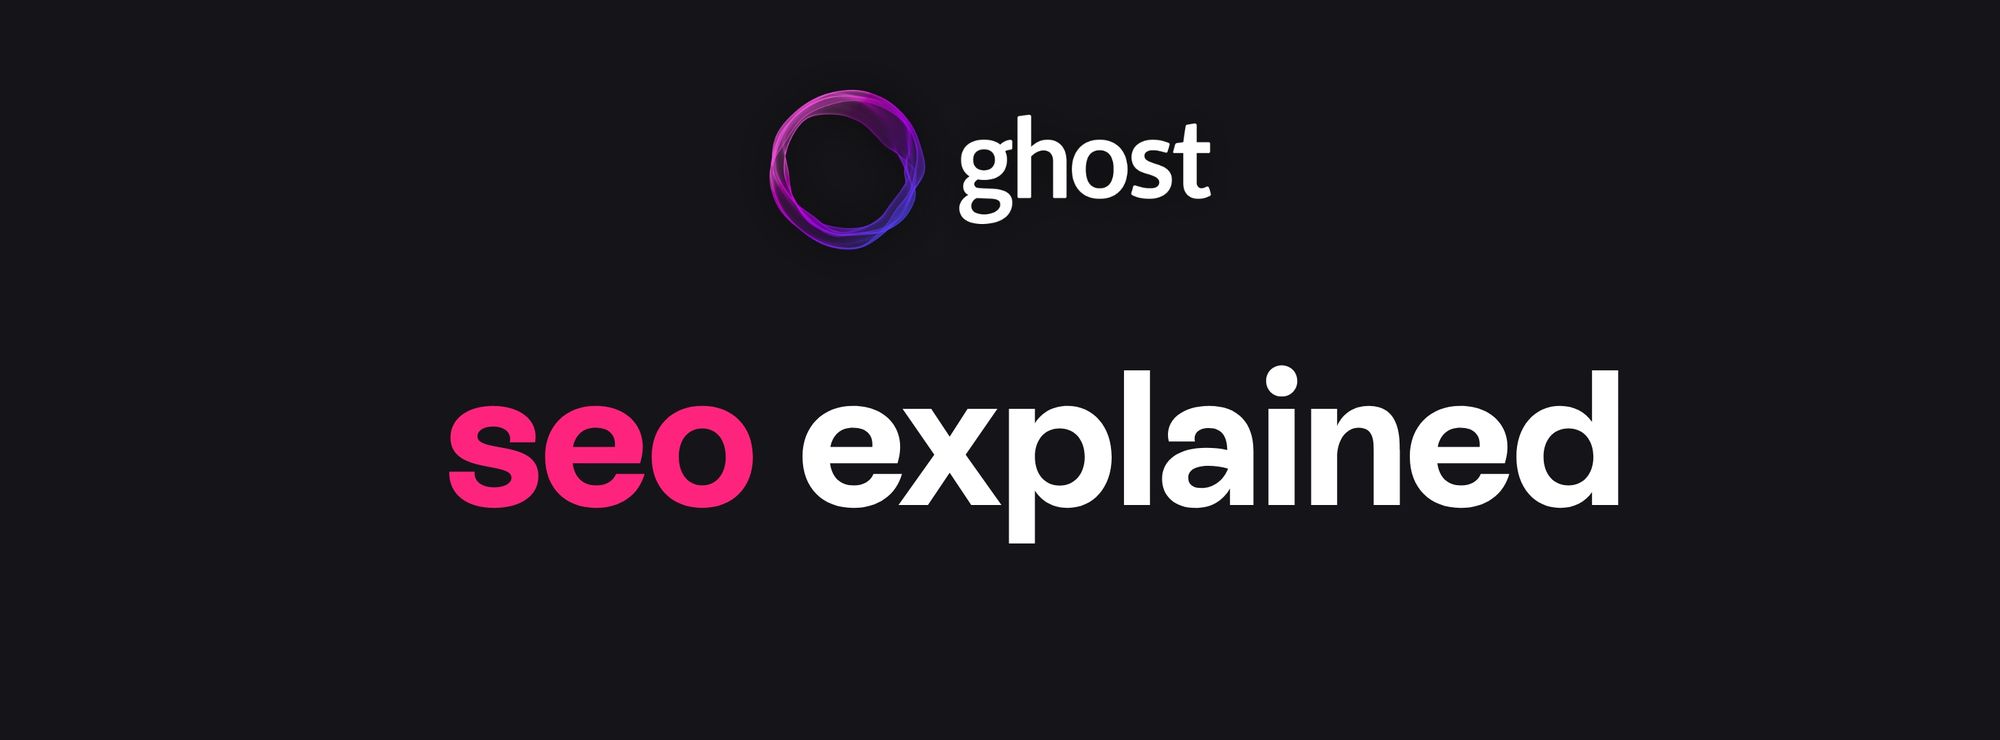 ghost seo explained - how to rank seo with ghost blog cms